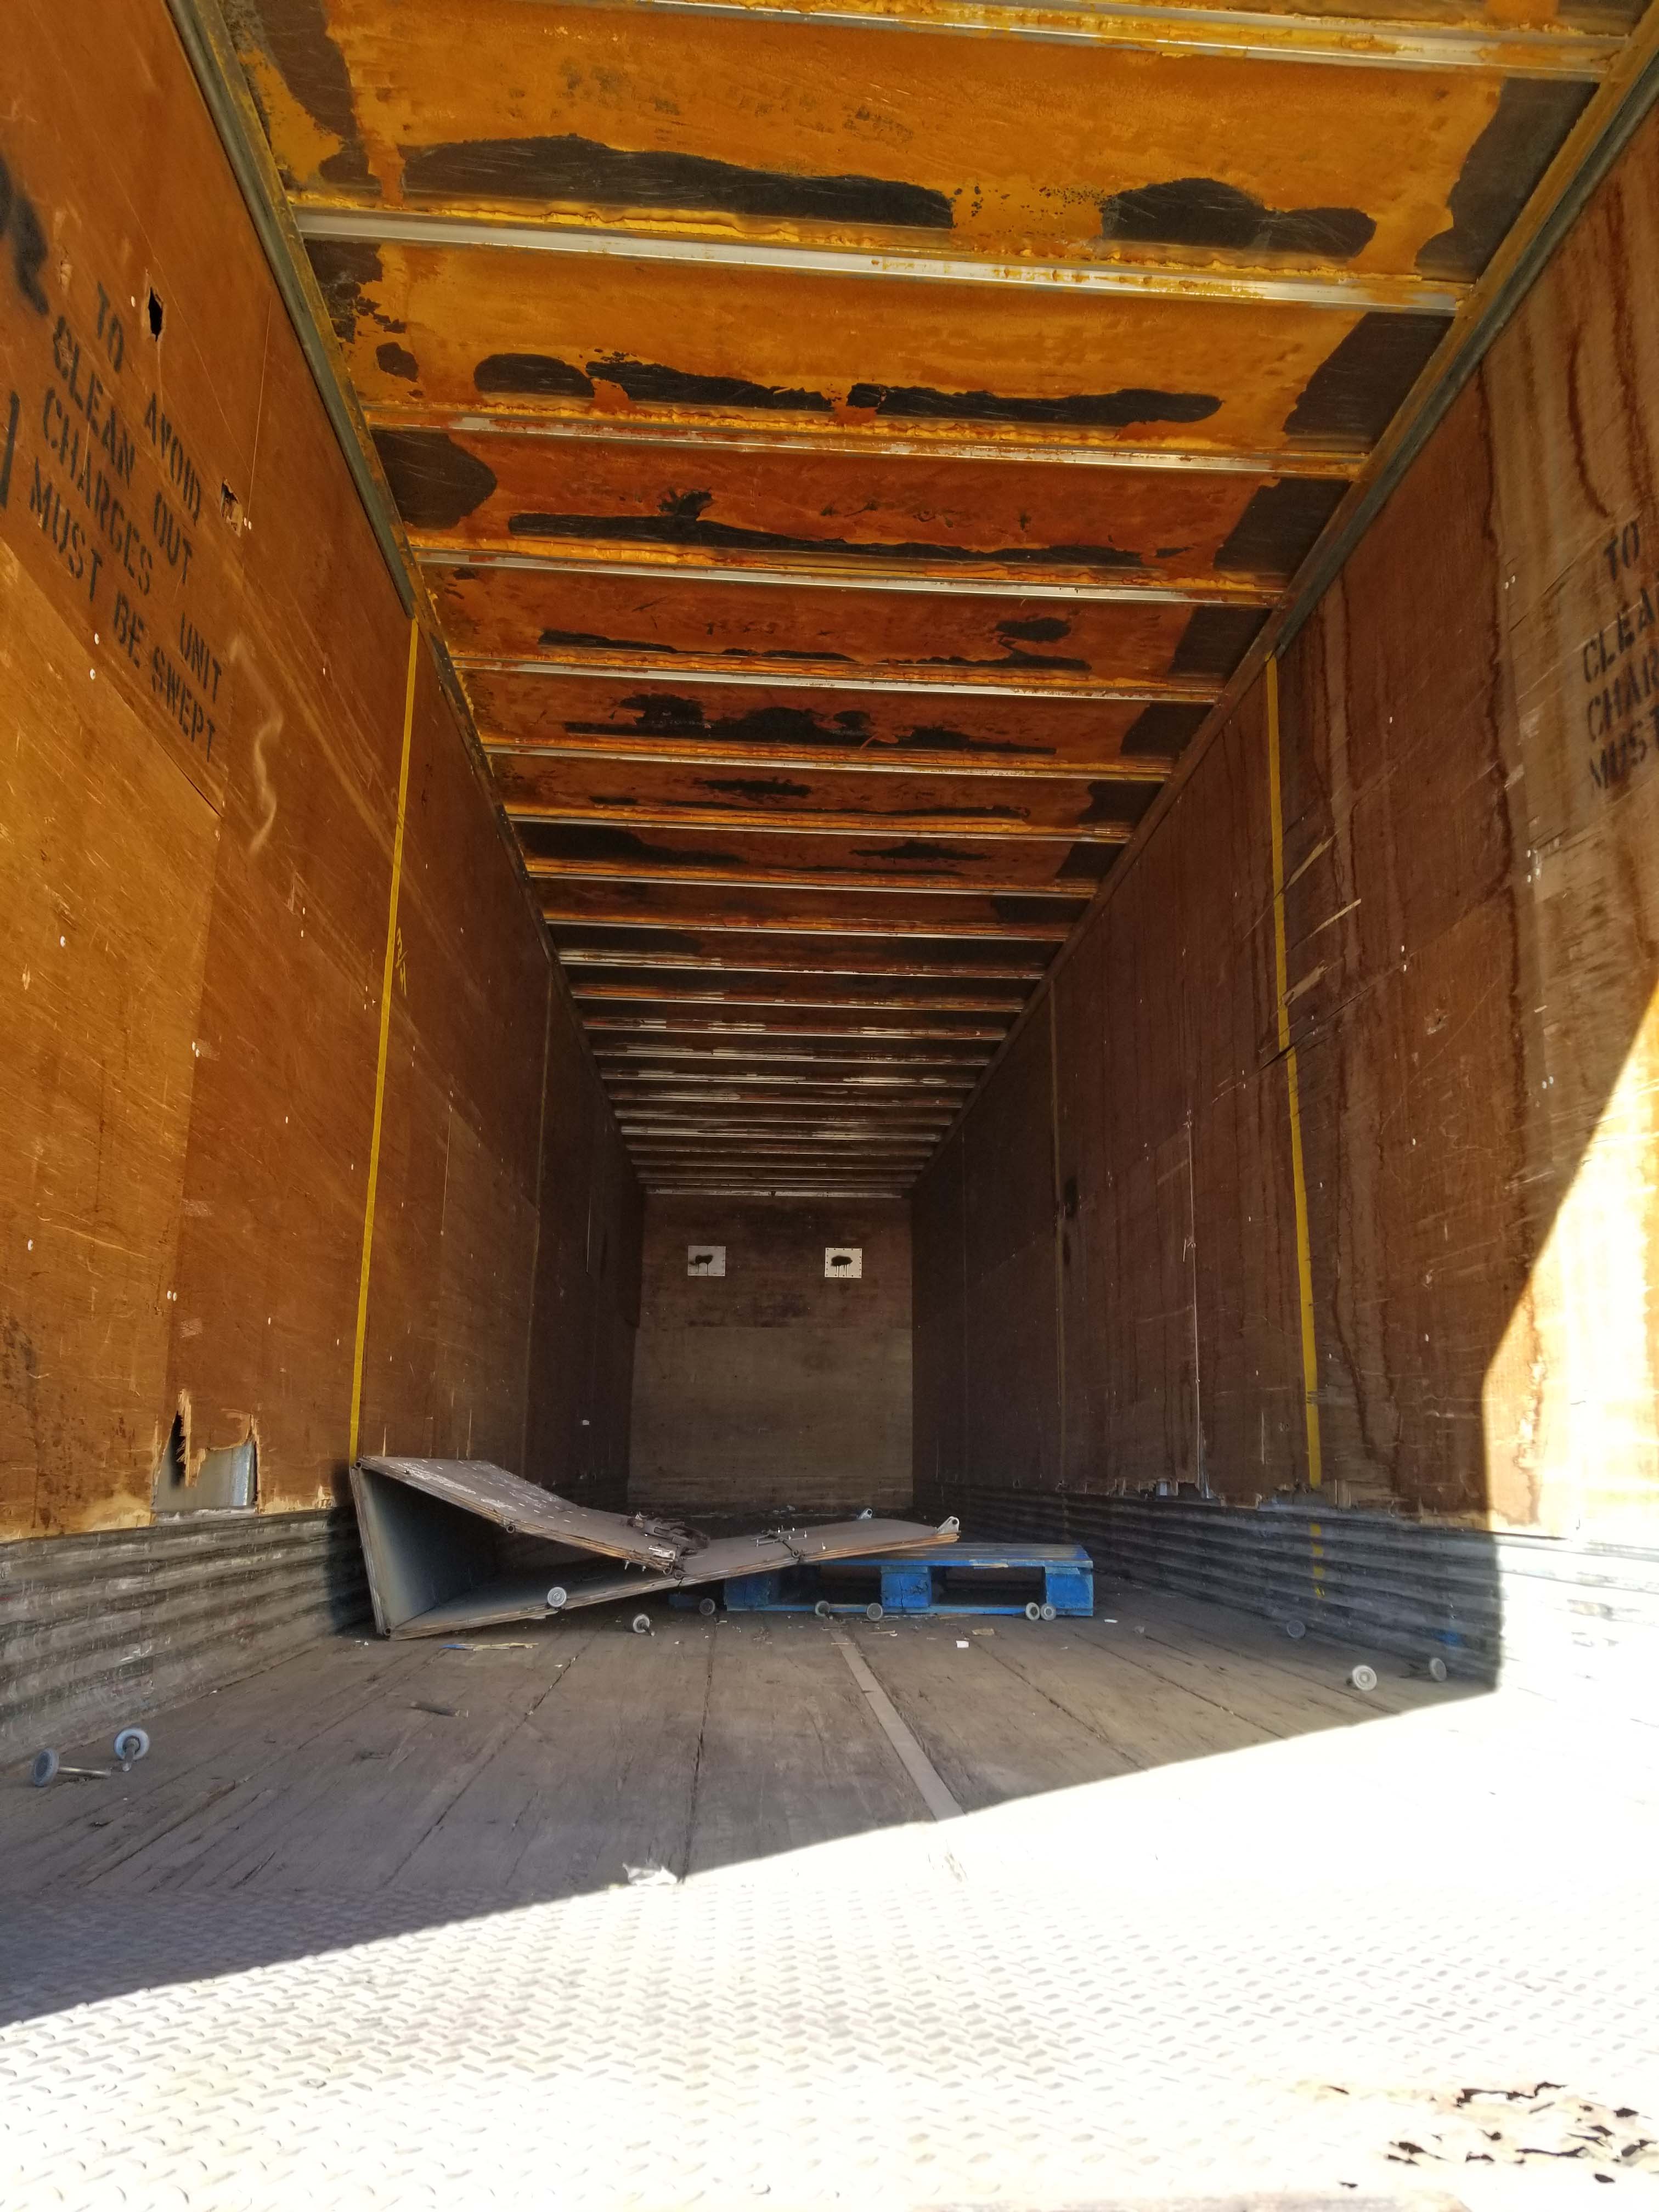 *SOLD* 1982 STRICK 45-foot Semi-Trailer - $1,200 • Warehouse Options